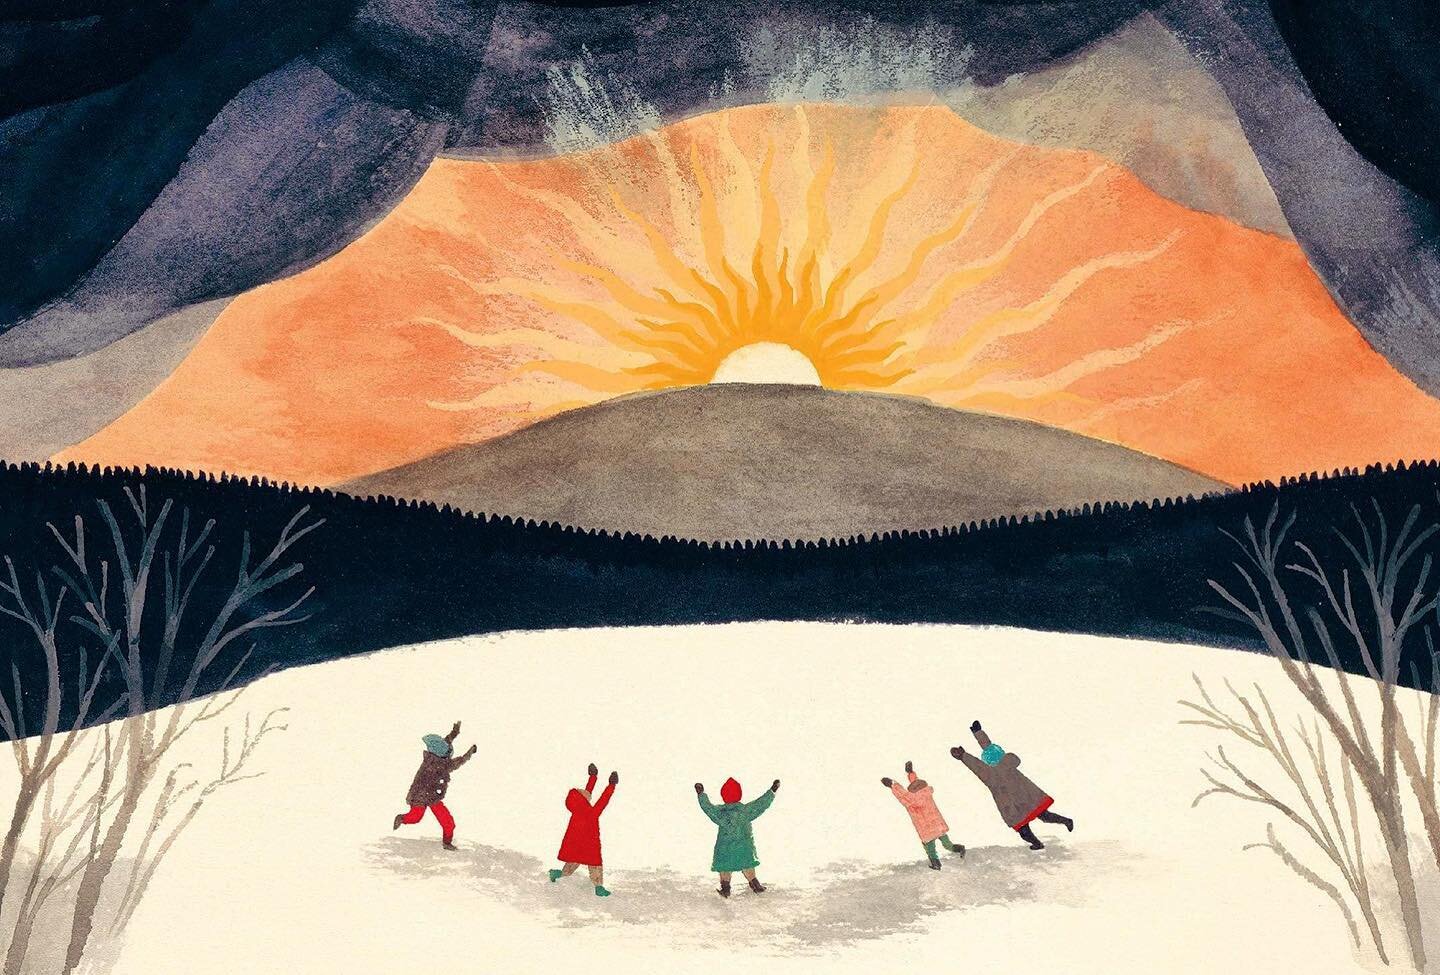 Happy Winter Solstice, Friends! ✨ [image from Susan Cooper&rsquo;s, &lsquo;The Shortest Day&rsquo;]